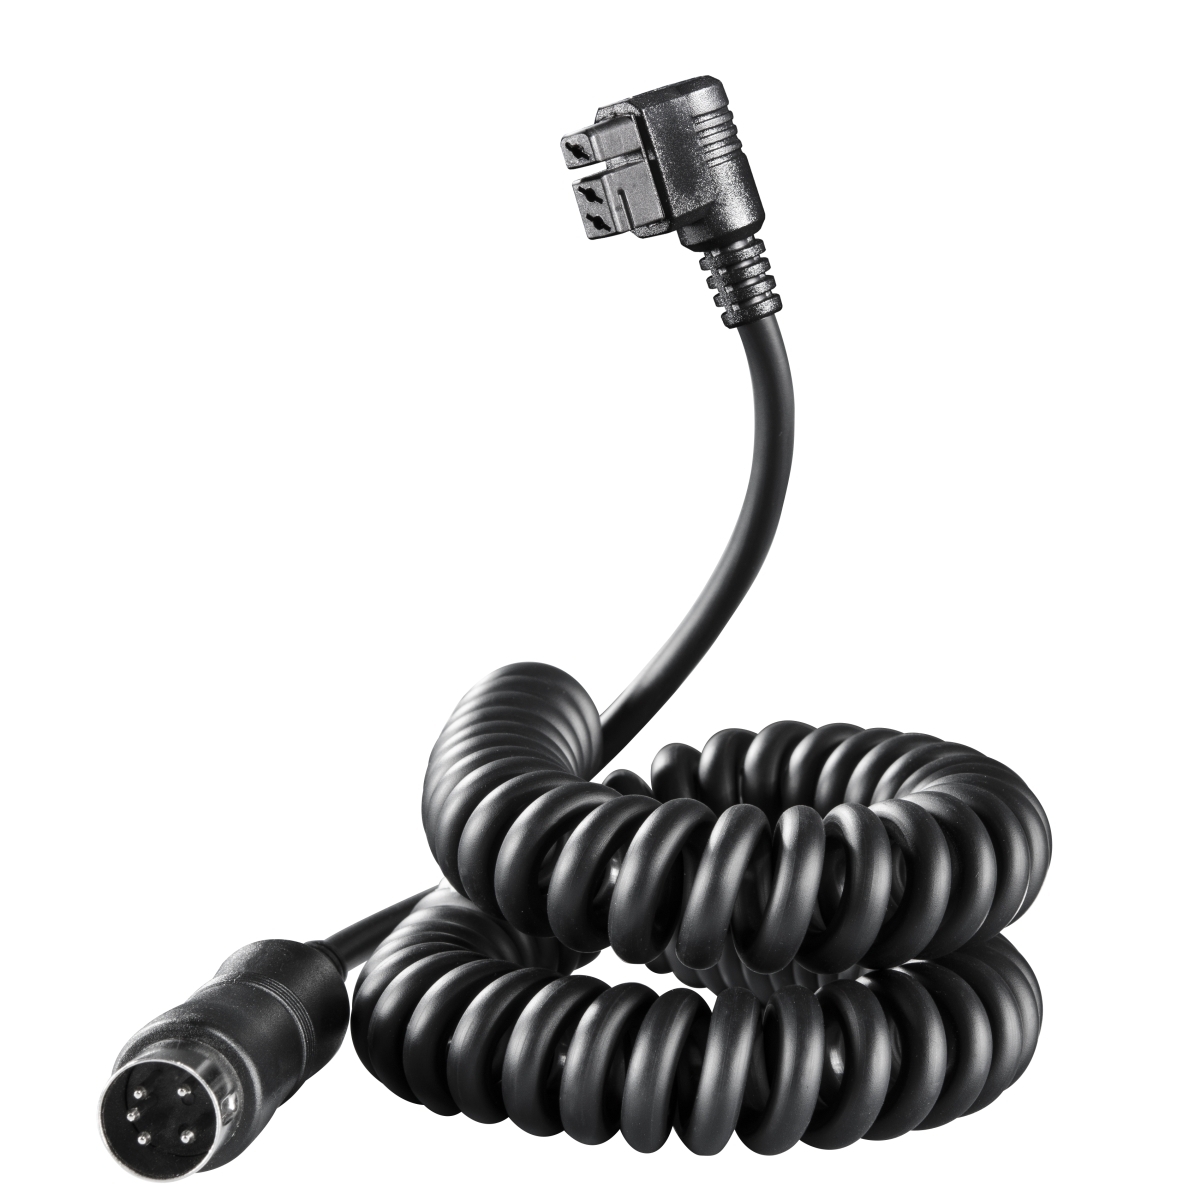 Walimex pro v2 flash cable for Light Shooter 2,5m